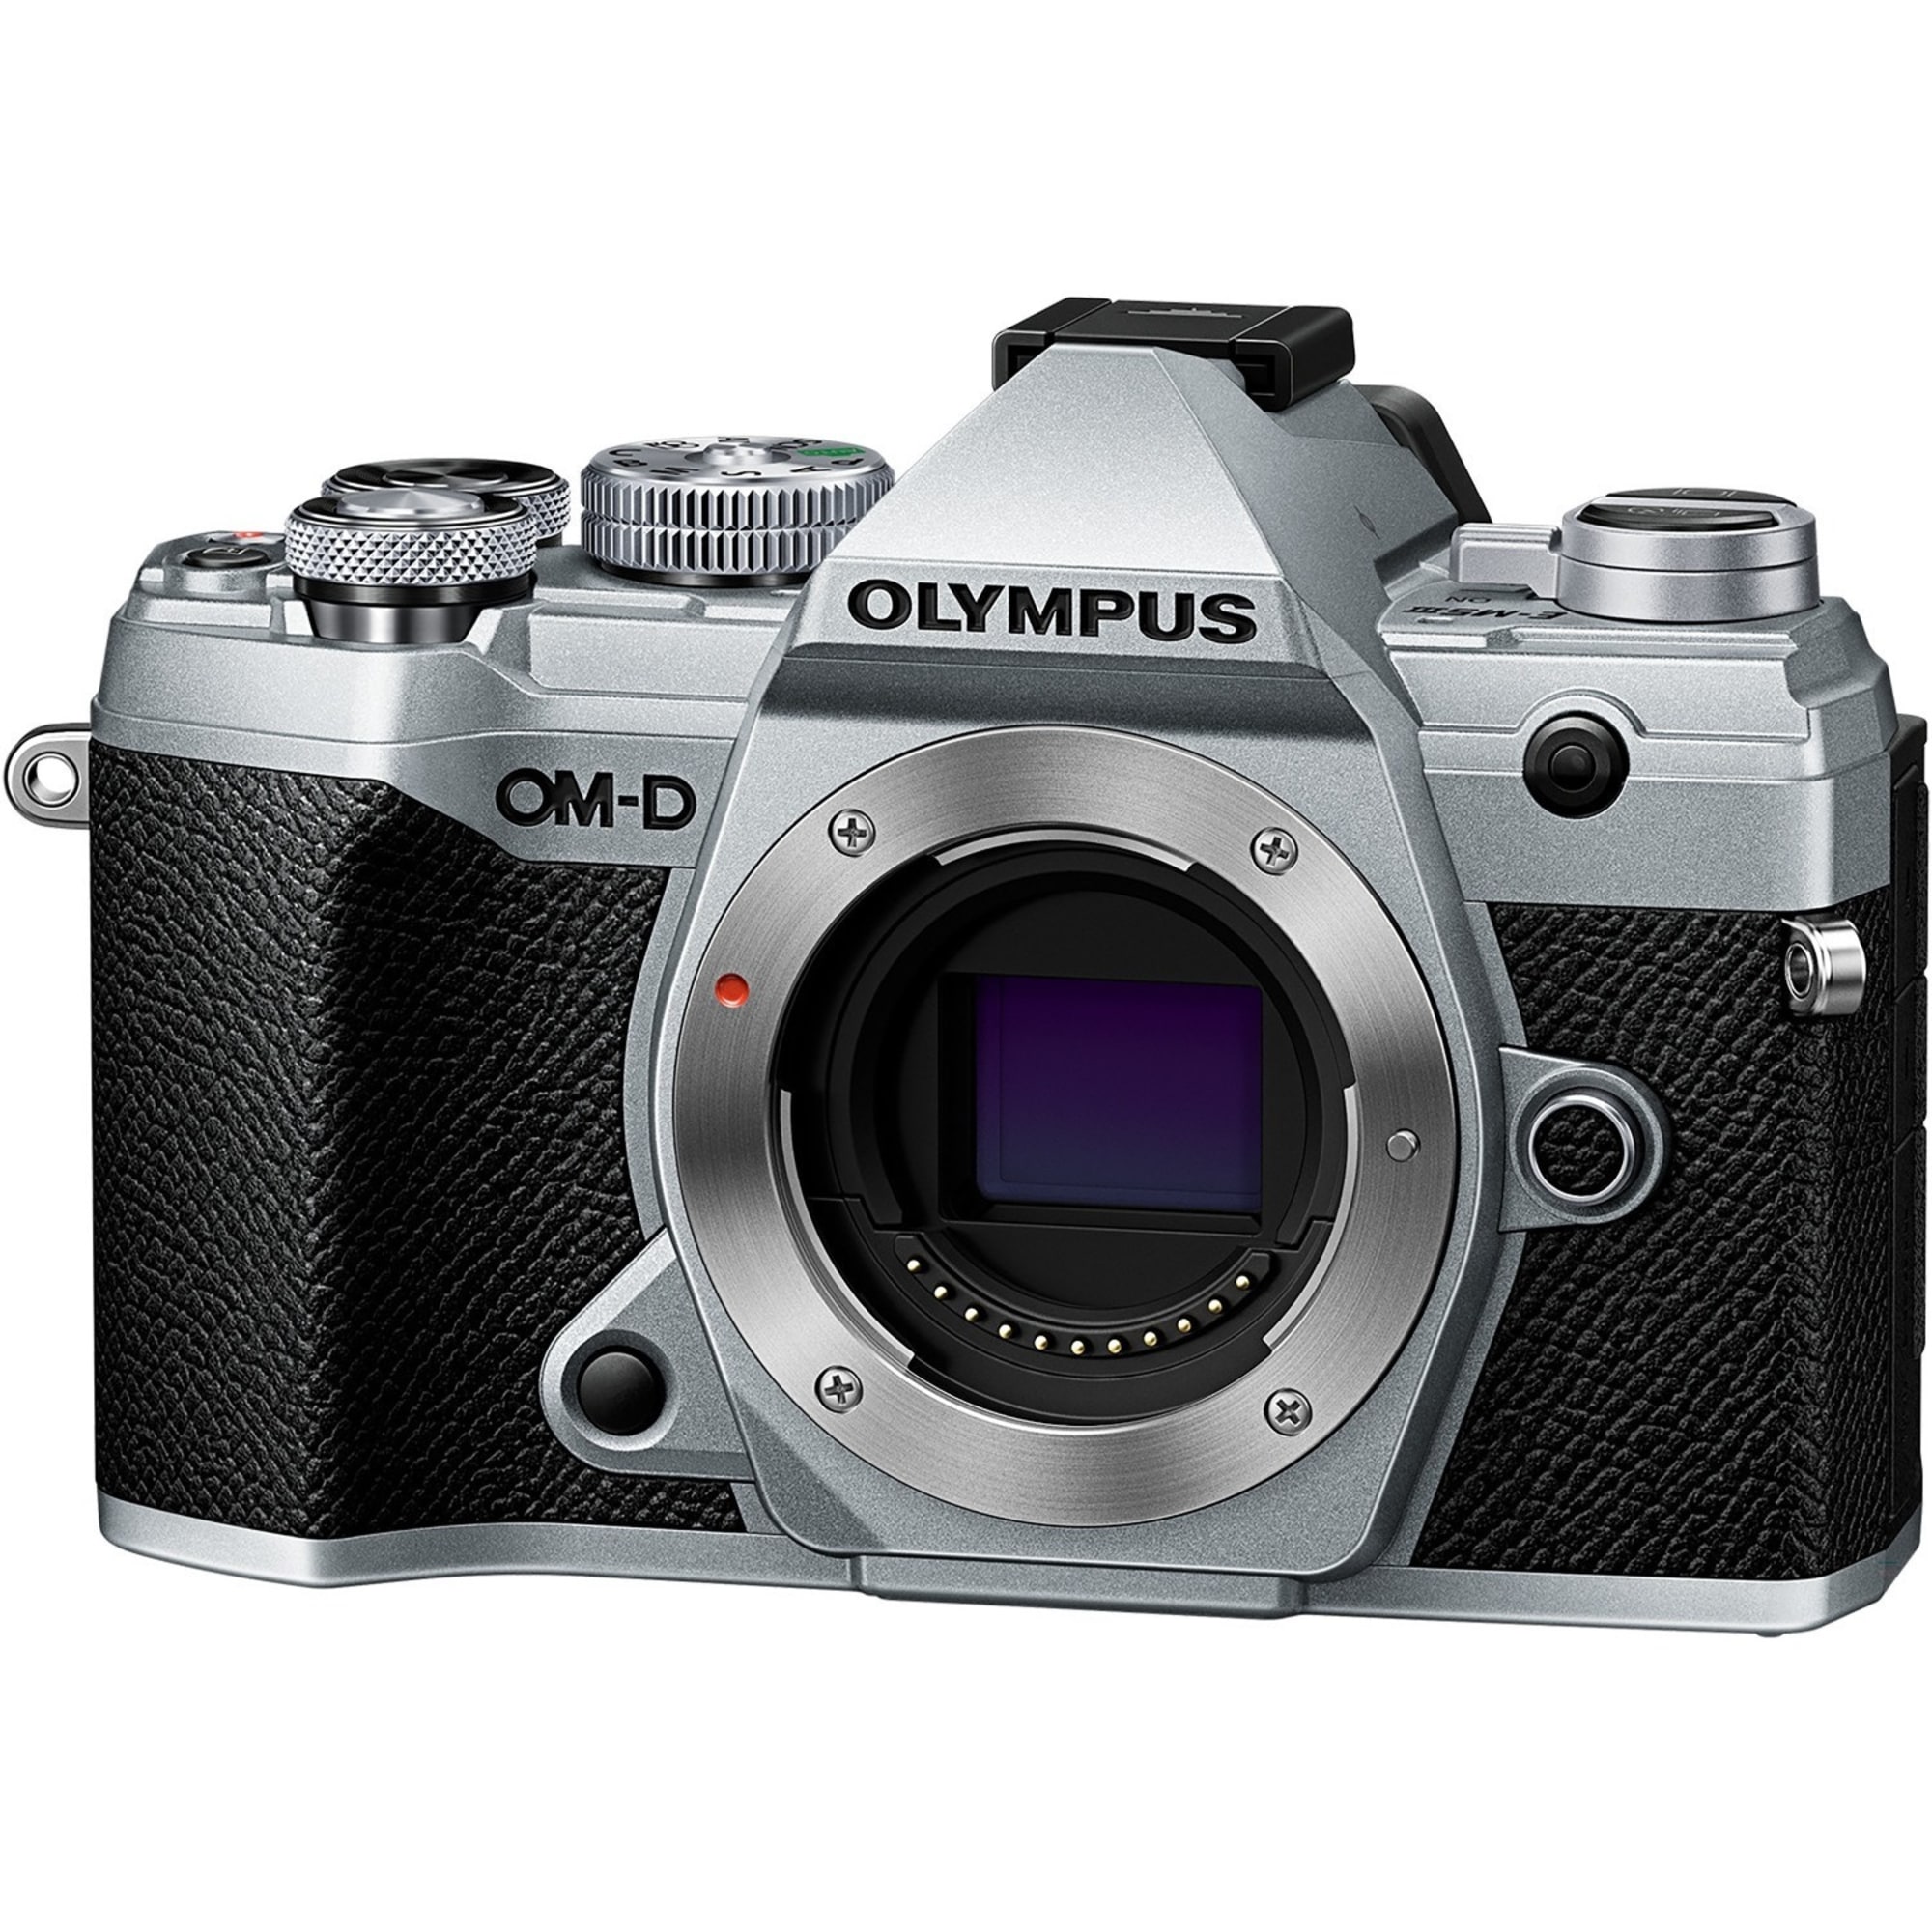 Olympus OM-D E-M5 Mark III - Digital camera - mirrorless - 20.4 MP - Four Thirds - 4K / 24 fps - body only - Wi-Fi, Bluetooth - silver - image 1 of 8